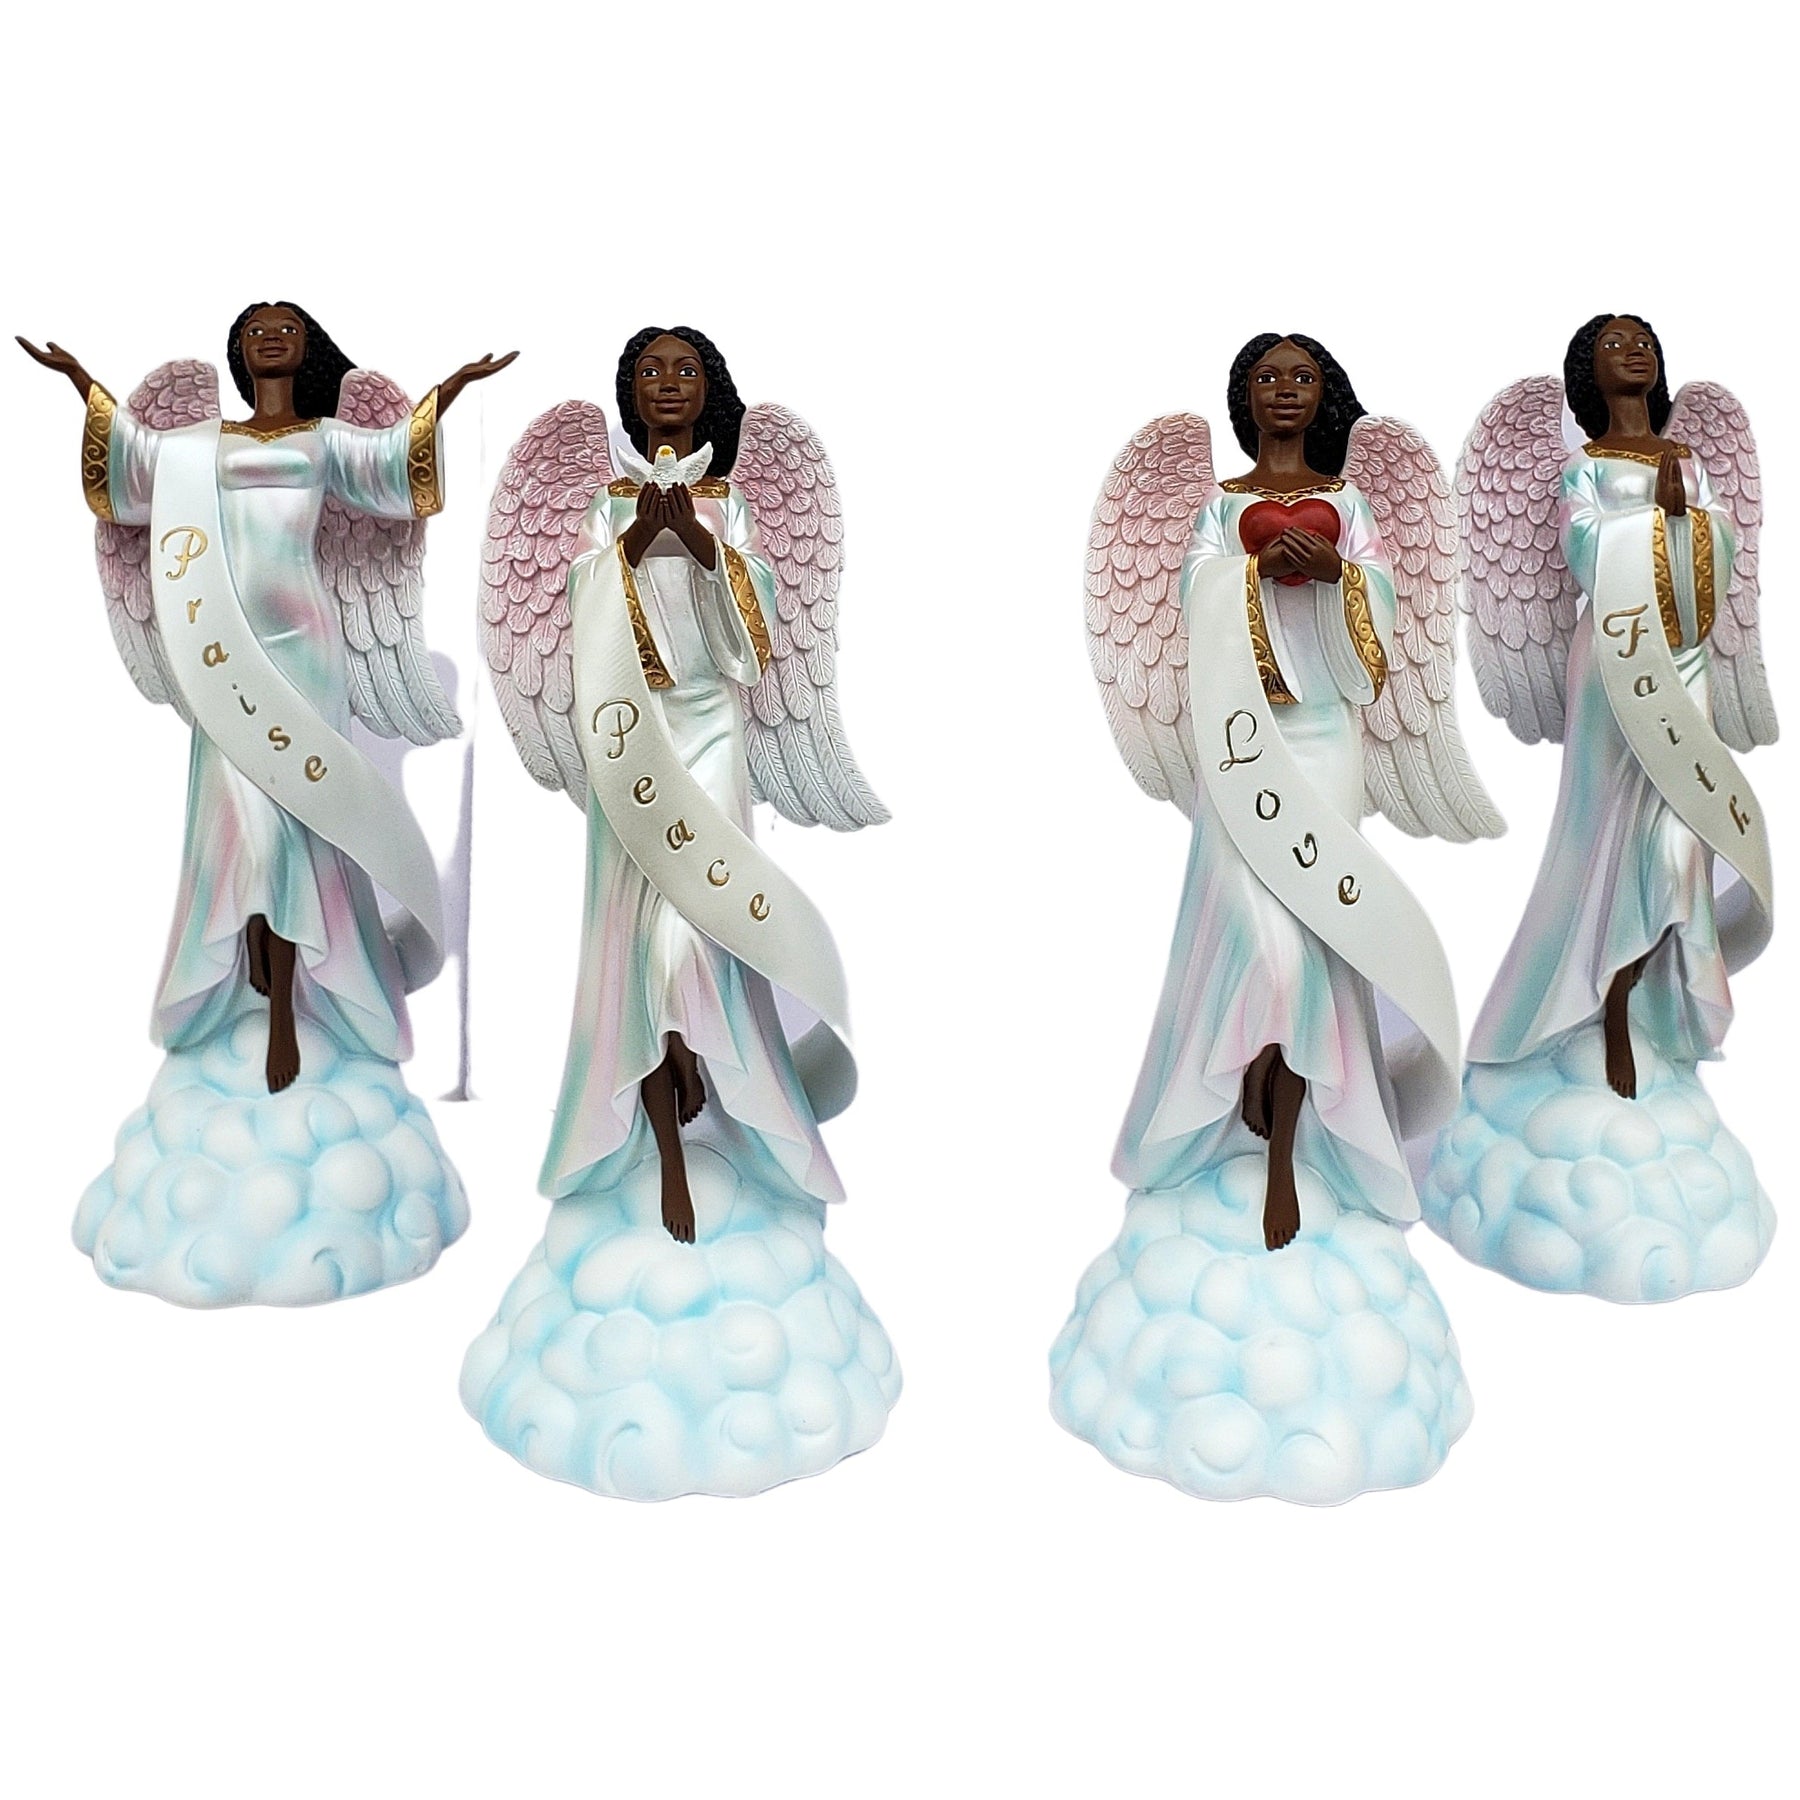 7 of 7: Praise and Worship Inspirational Angel Series